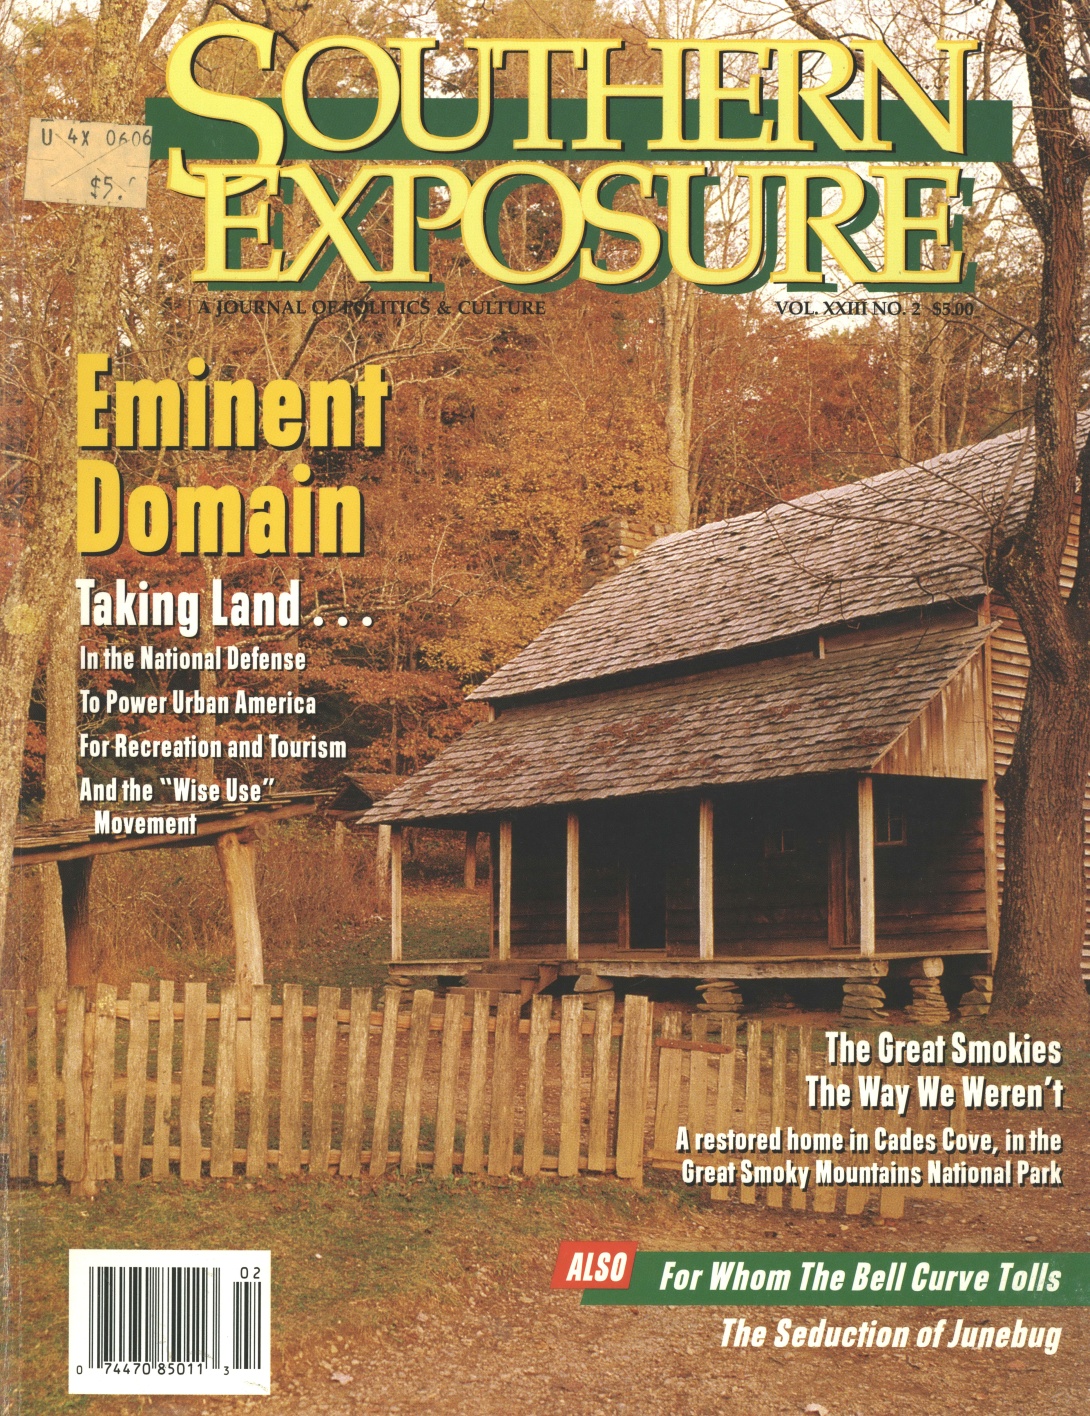 Magazine cover with photo of cabin in forest and pasture, text reads "Eminent Domain"